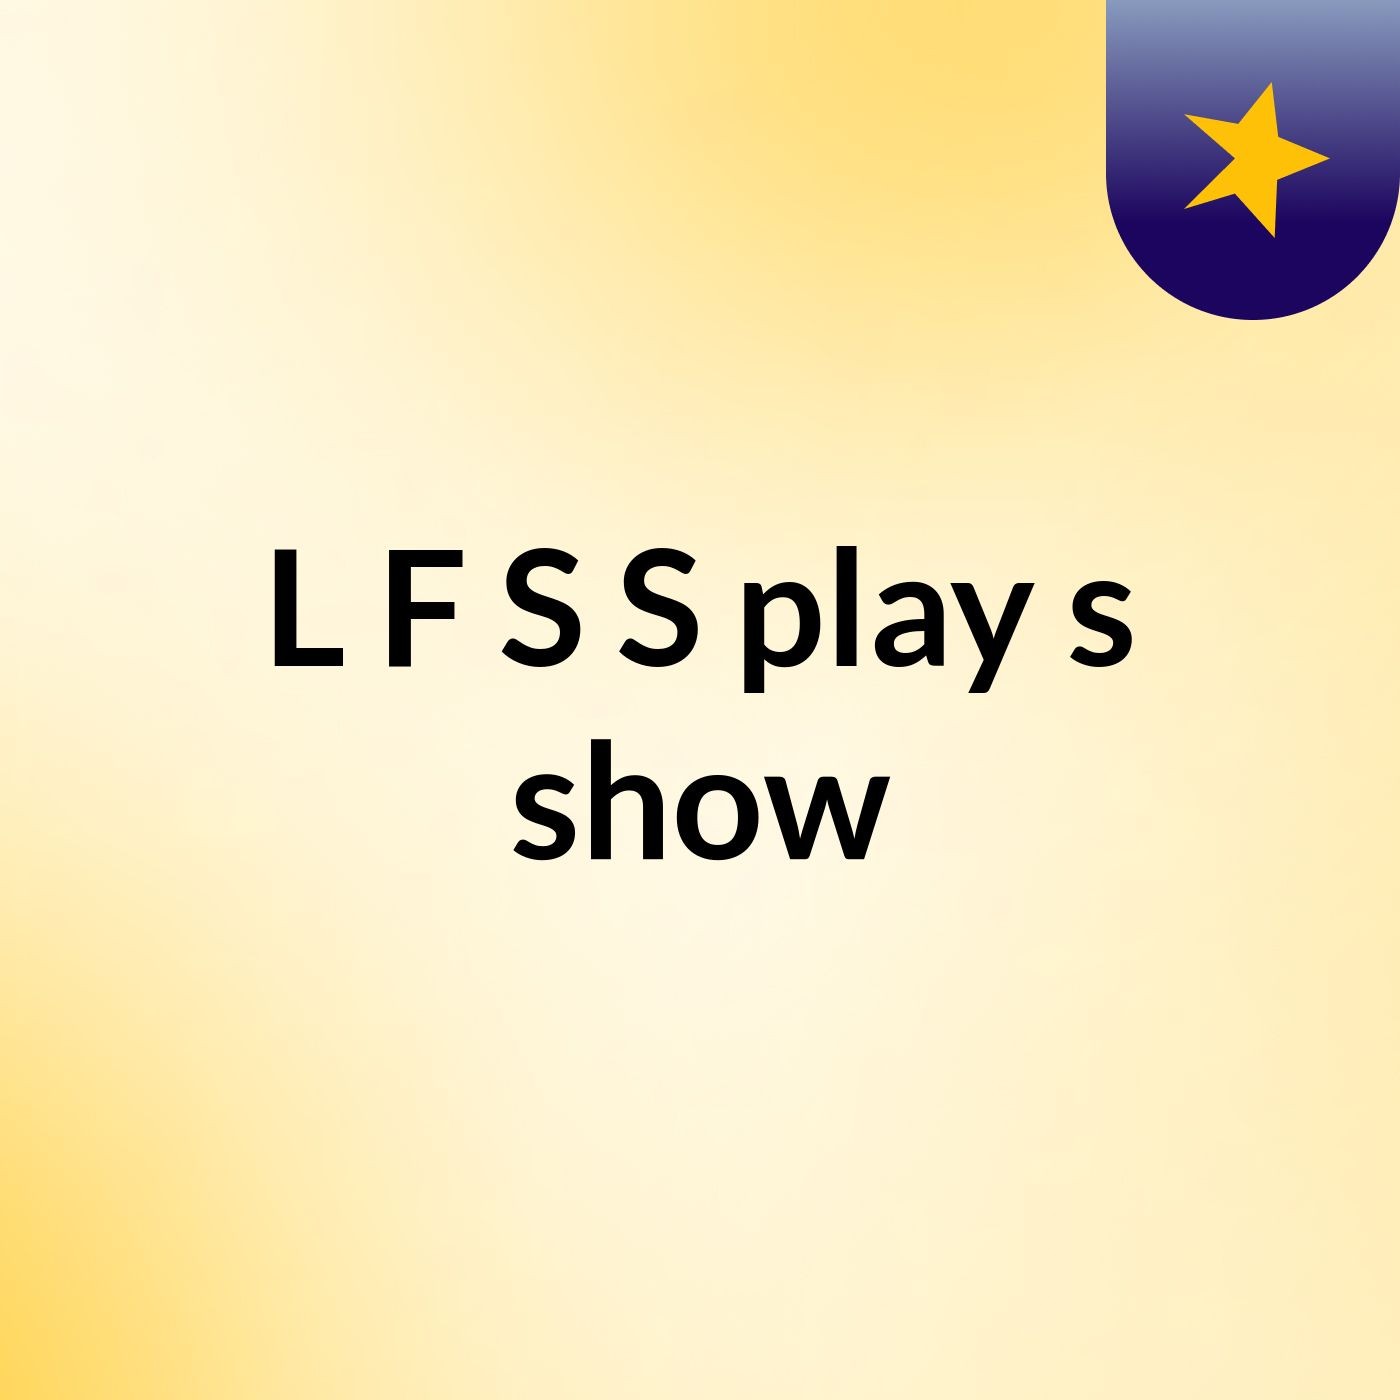 L F S S play's show